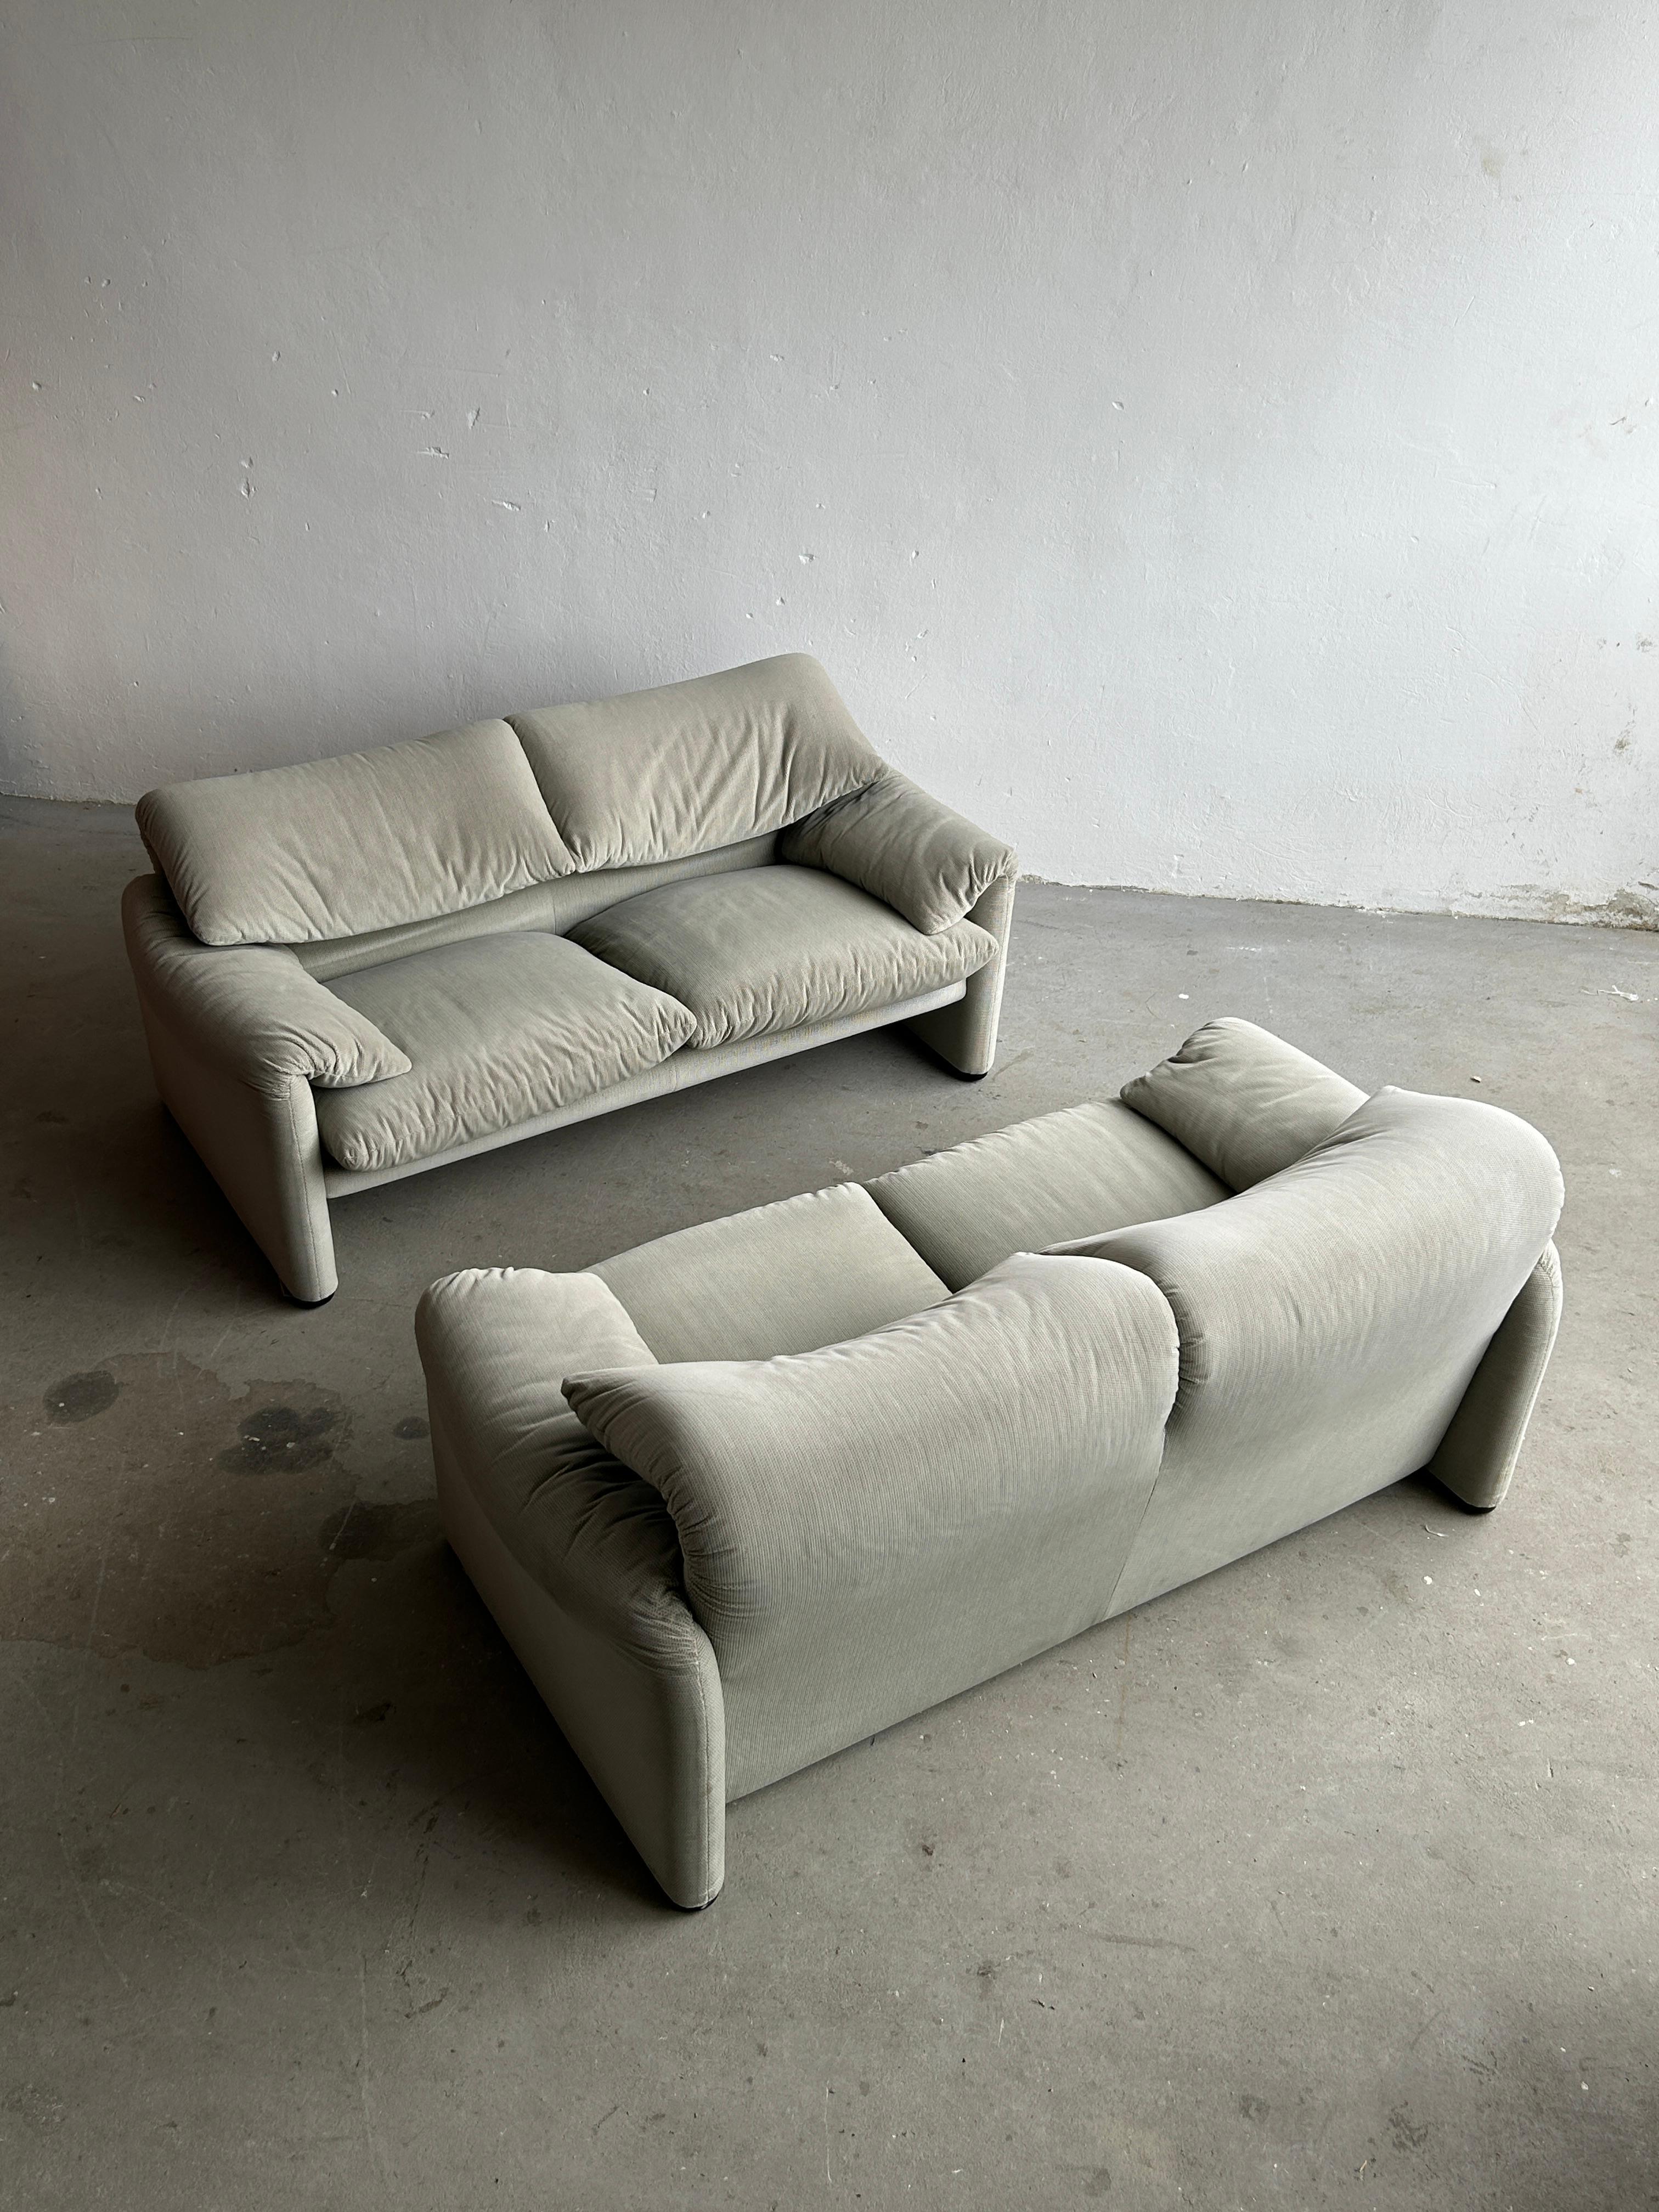 Mid-Century Modern Pair of Vintage 'Maralunga' Two-Seater Sofas, Vico Magistretti for Cassina, 1970